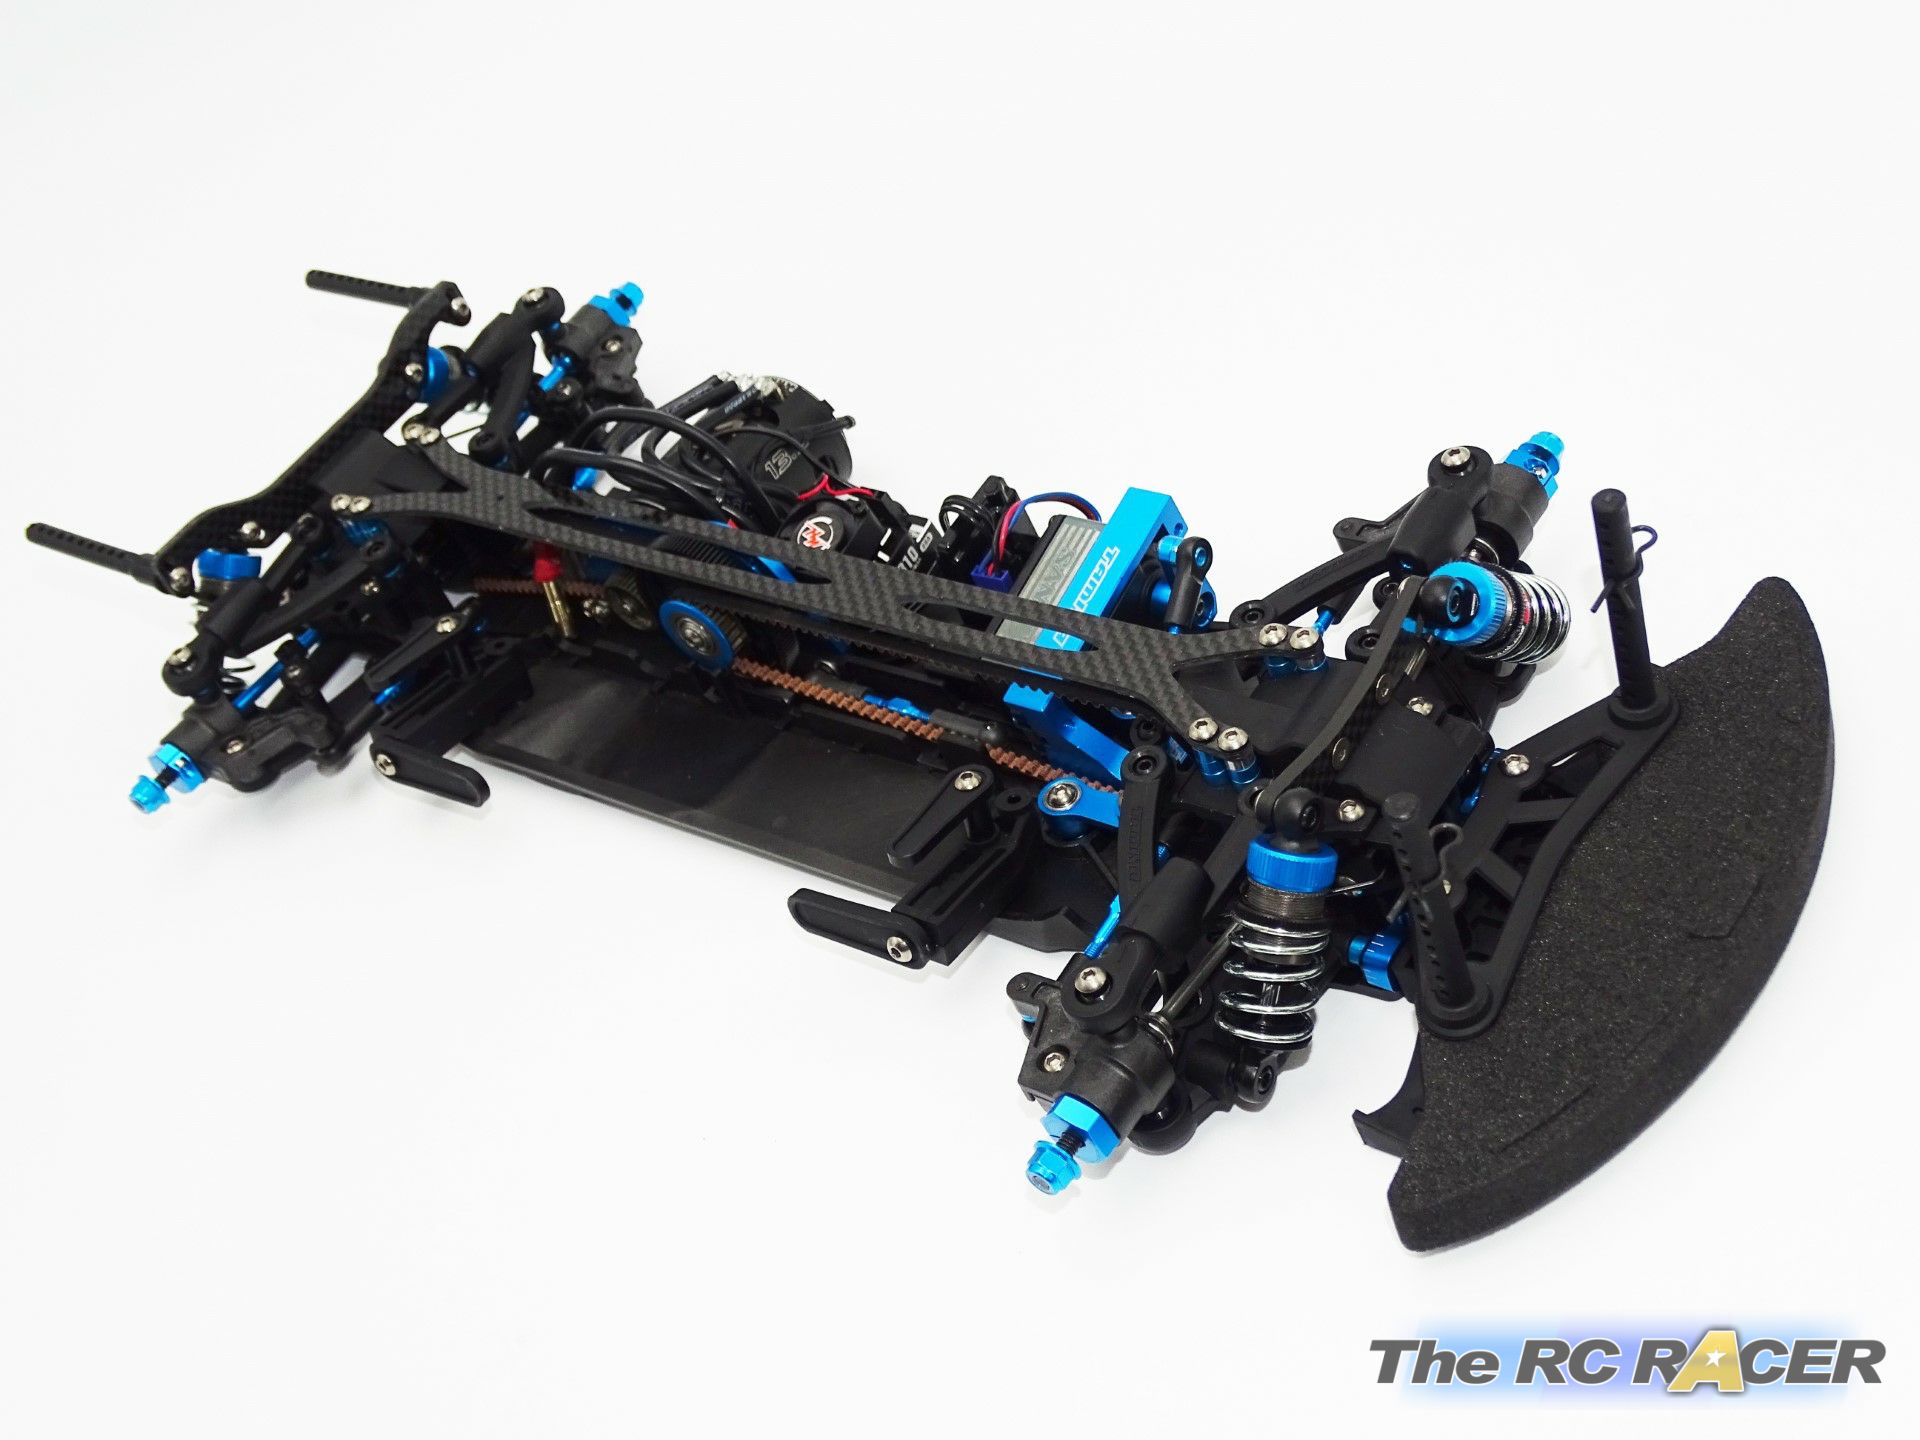 Tamiya TA08 Pro TheRcRacer New Carbon parts Preview | The RC Racer